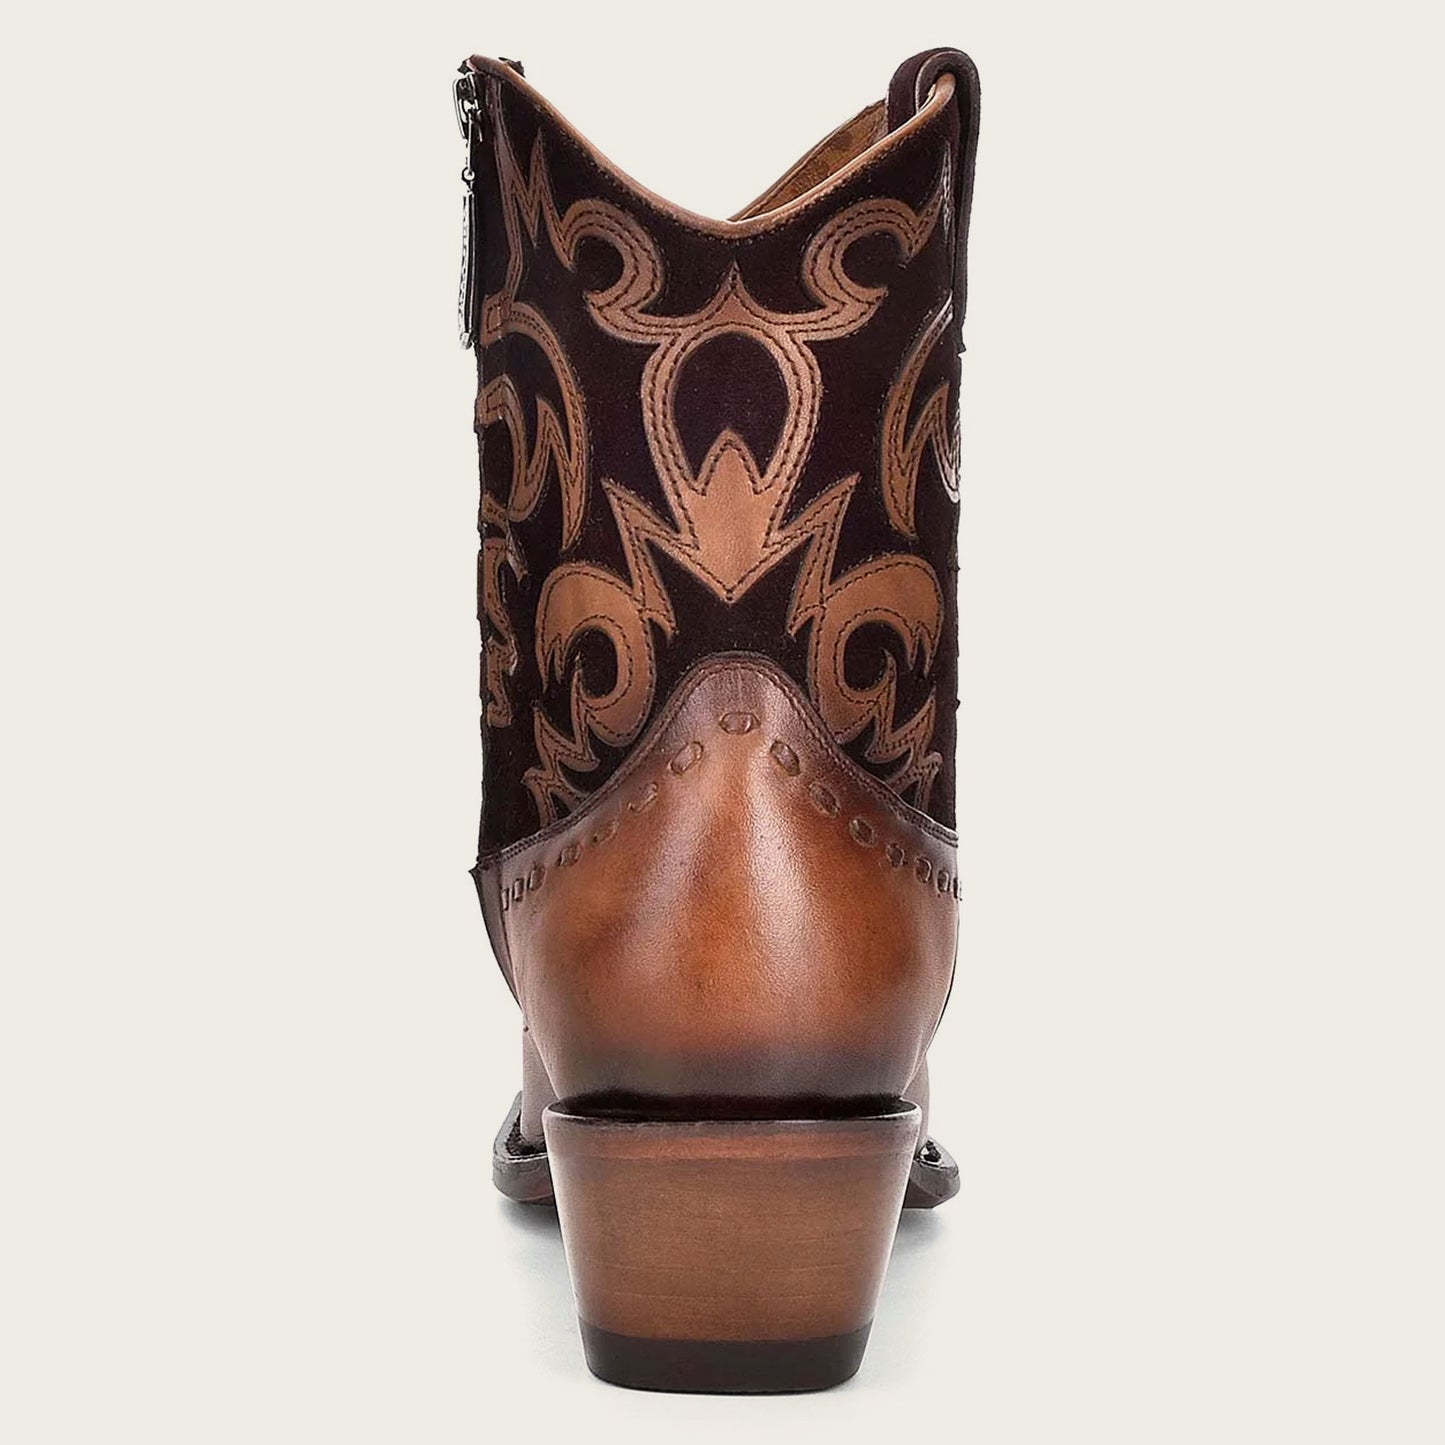 Brown Western leather bootie - high-quality leather with classic pointed toe and slanteIndulge in the bold and beautiful aesthetic of our Western Chic booties, and let them be the centerpiece of your outfit.